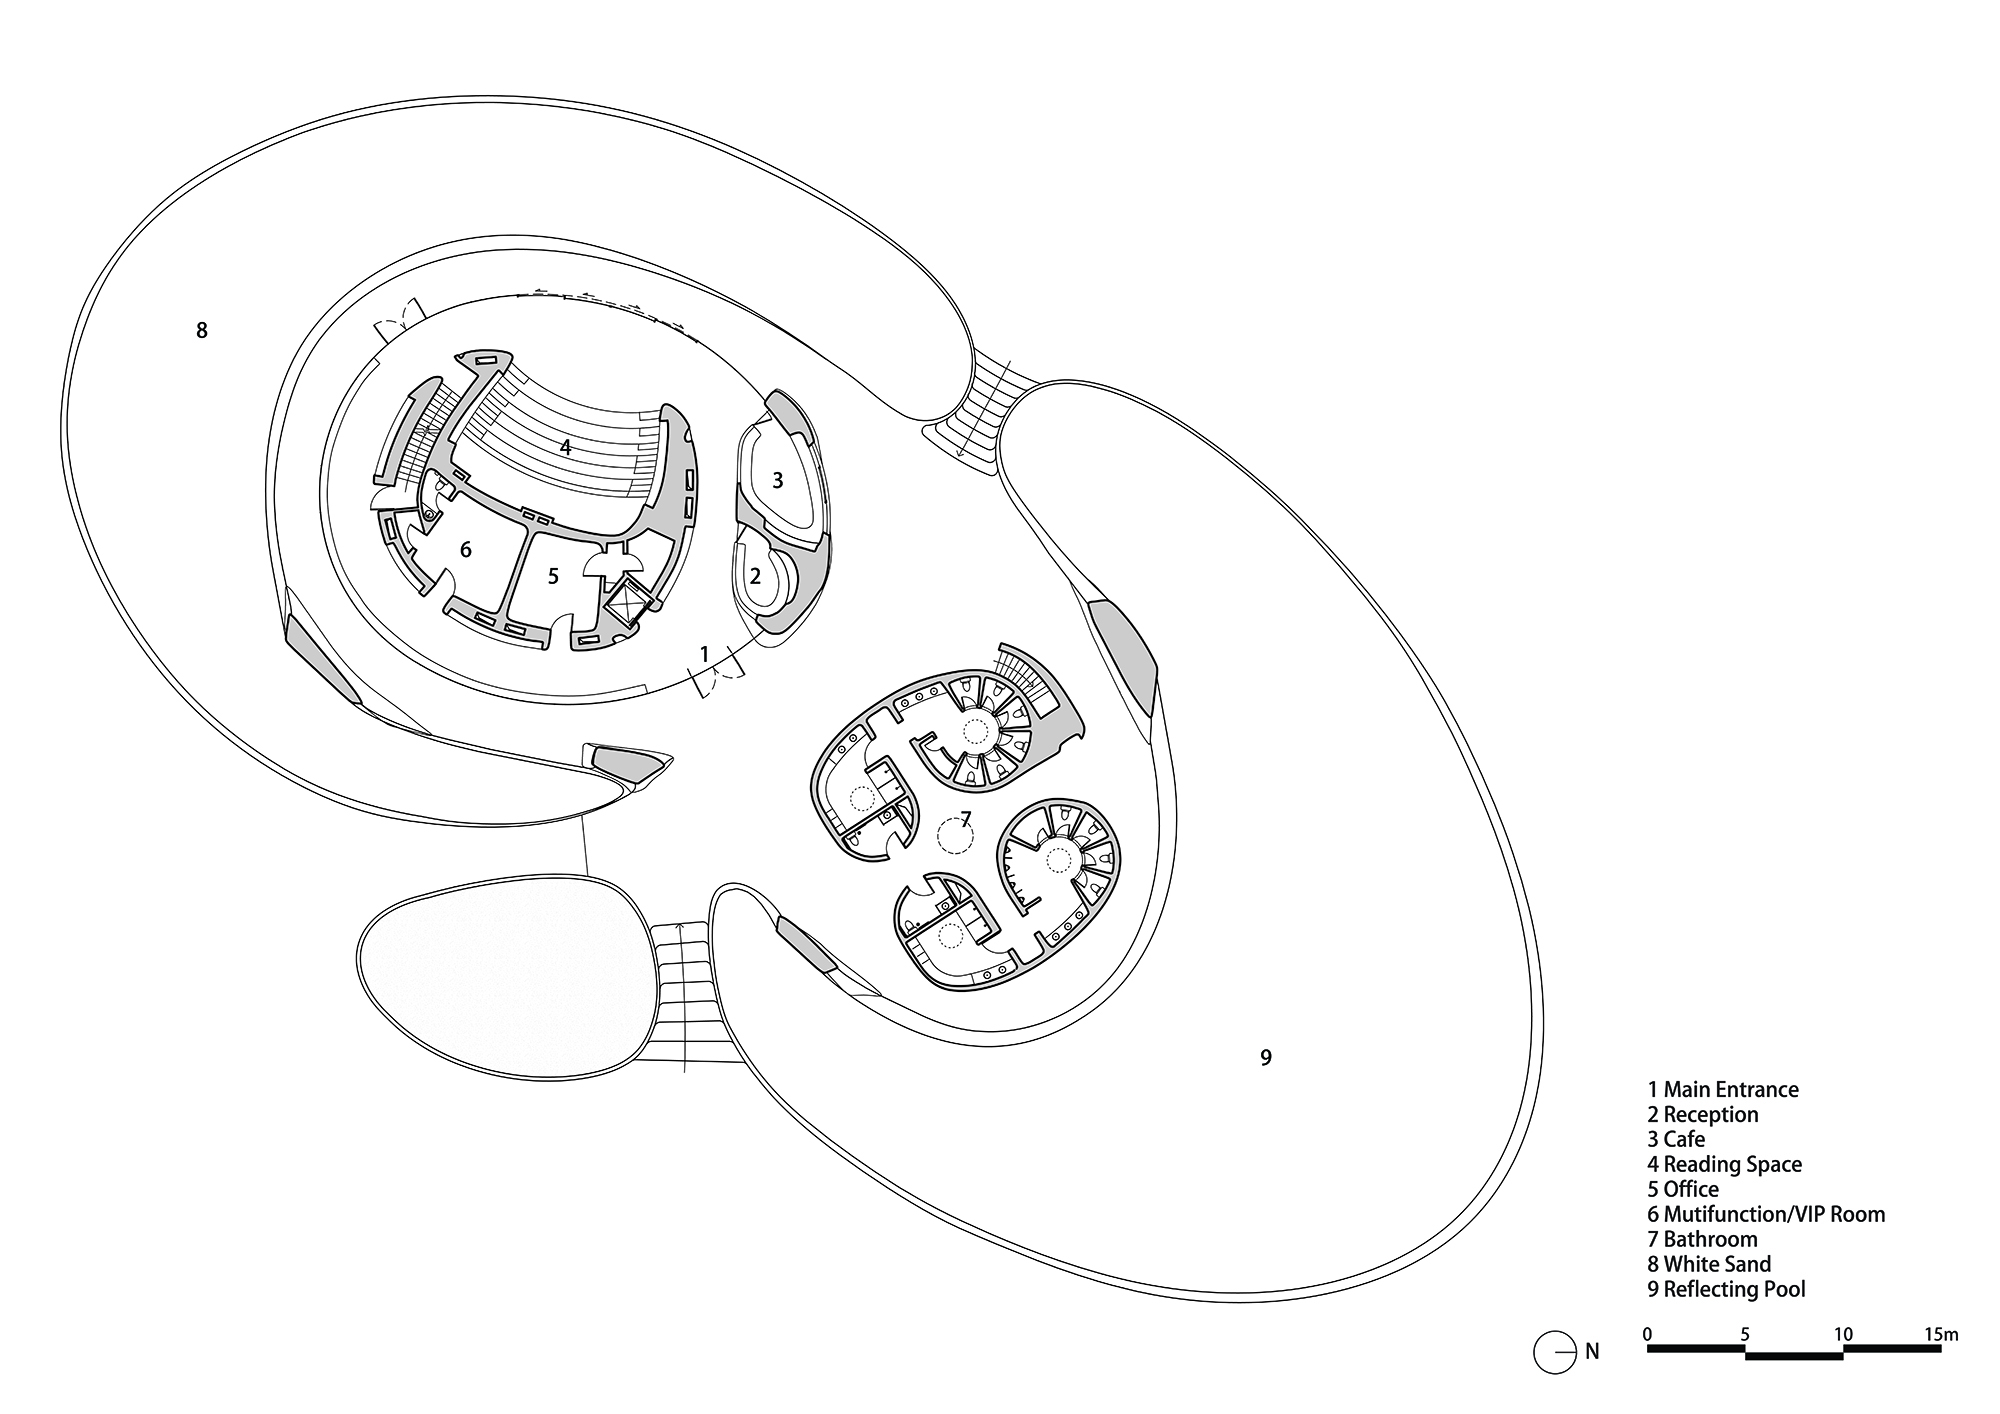 g2 _MAD_Wormhole Library_F1 Plan.jpg